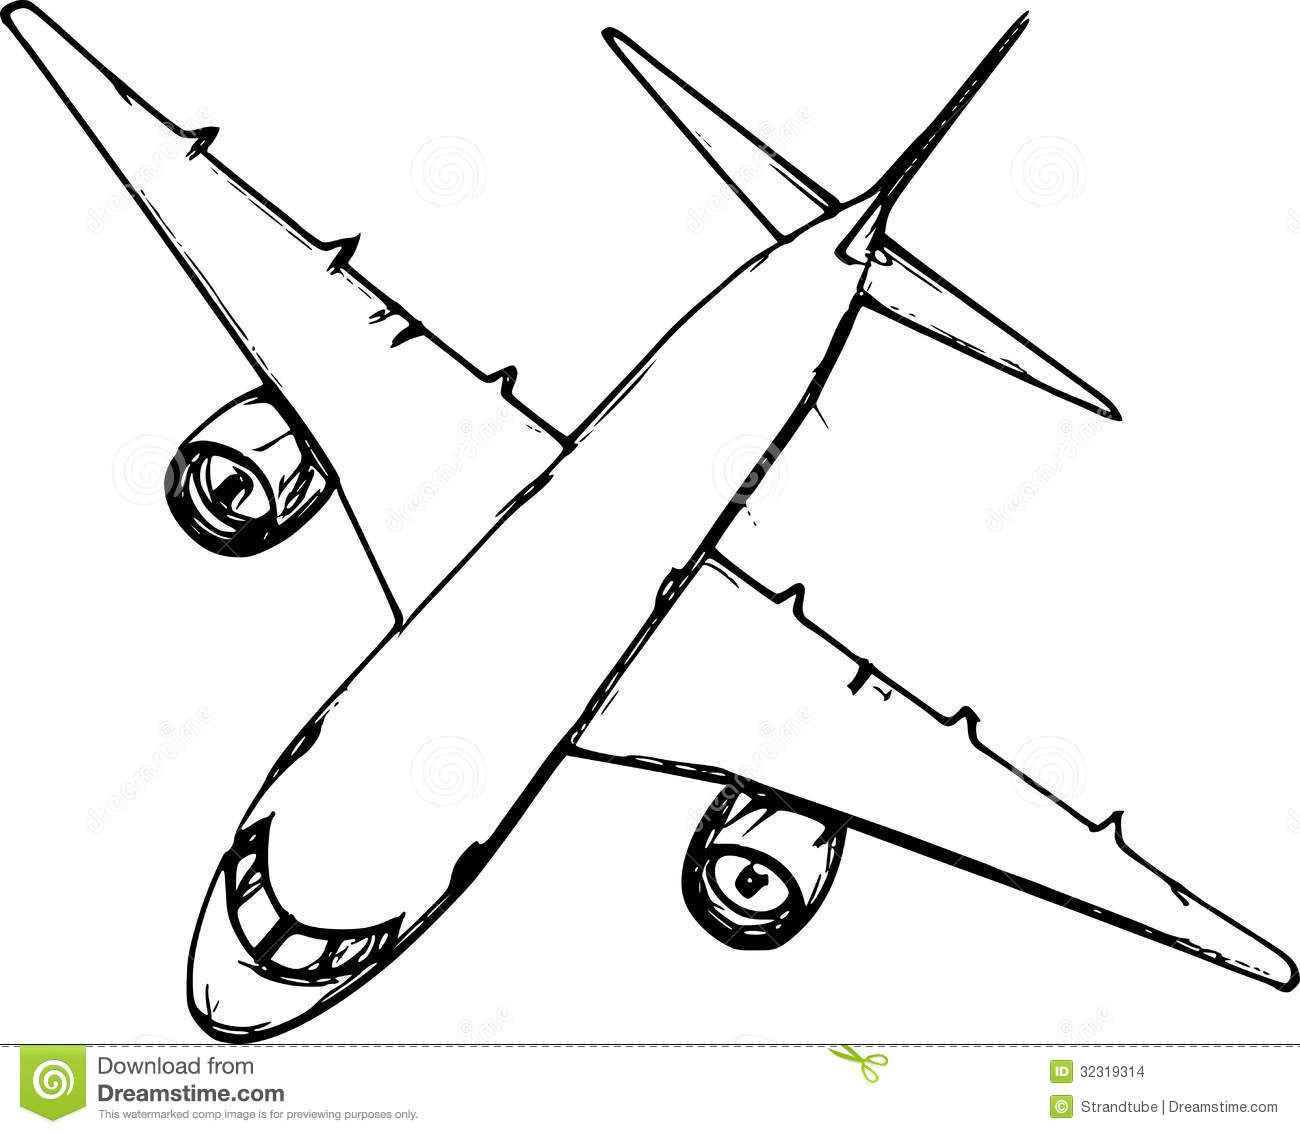 Animal Easy Sketch Drawings Airplane with simple drawing